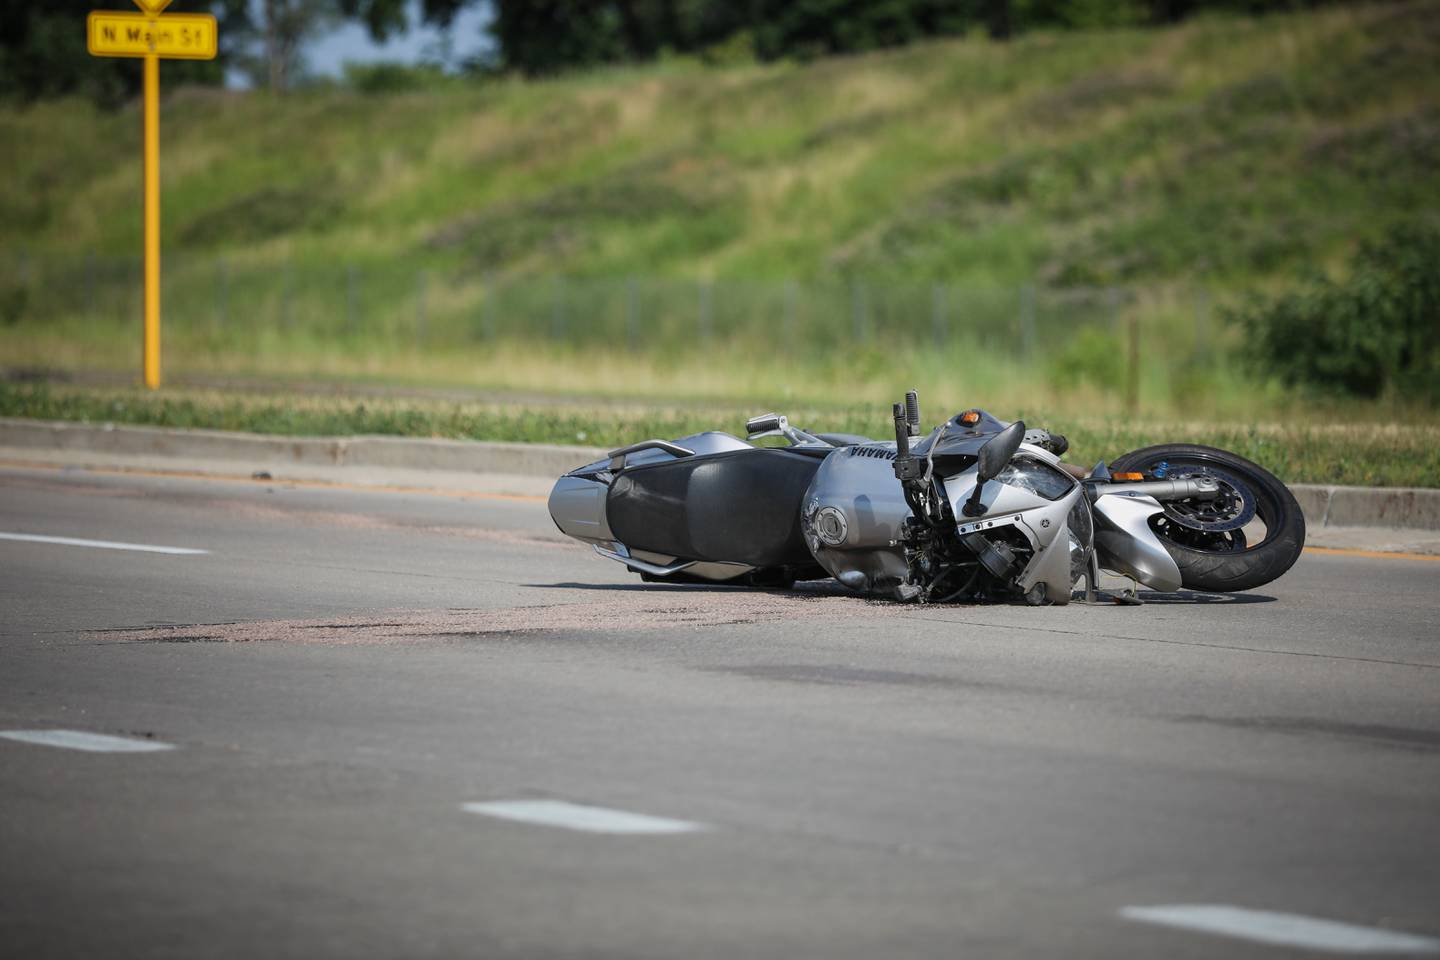 A crash involving two motorcycles Saturday, July 2, 2022, on Route 31 south of North Main Street in Algonquin resulted in both drivers being taken to the hospital in serious condition, Algonquin police said.